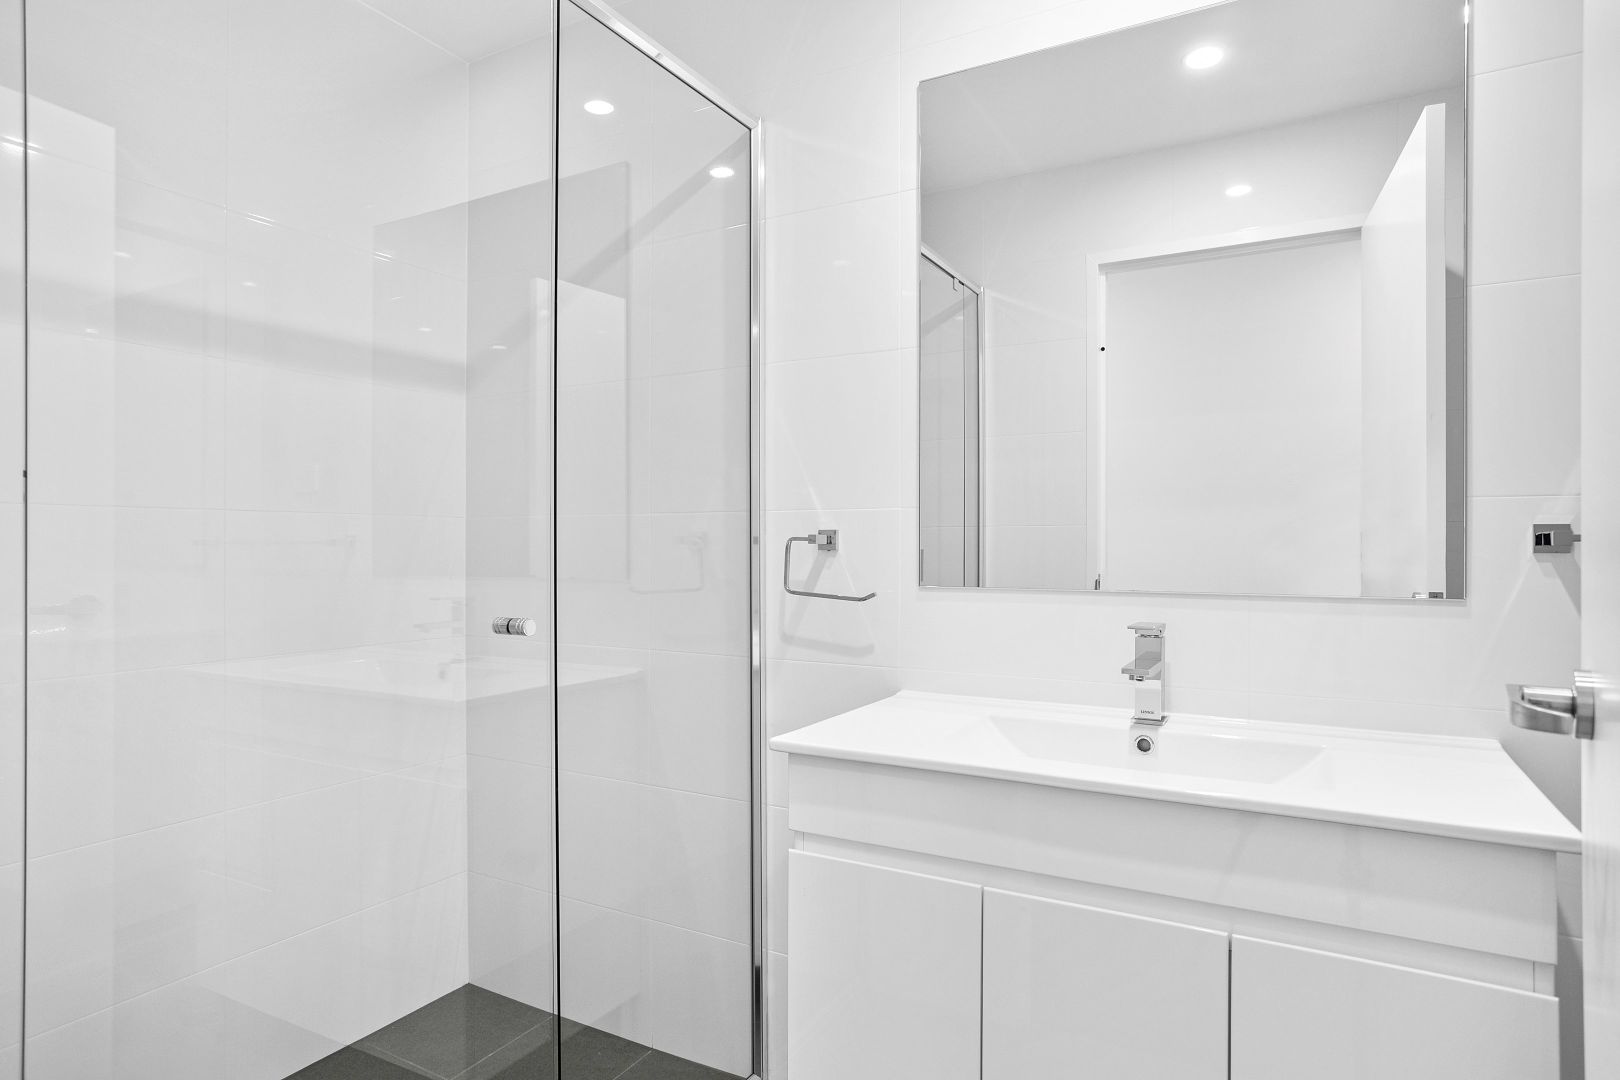 111/1 Evelyn Court, Shellharbour City Centre NSW 2529, Image 1